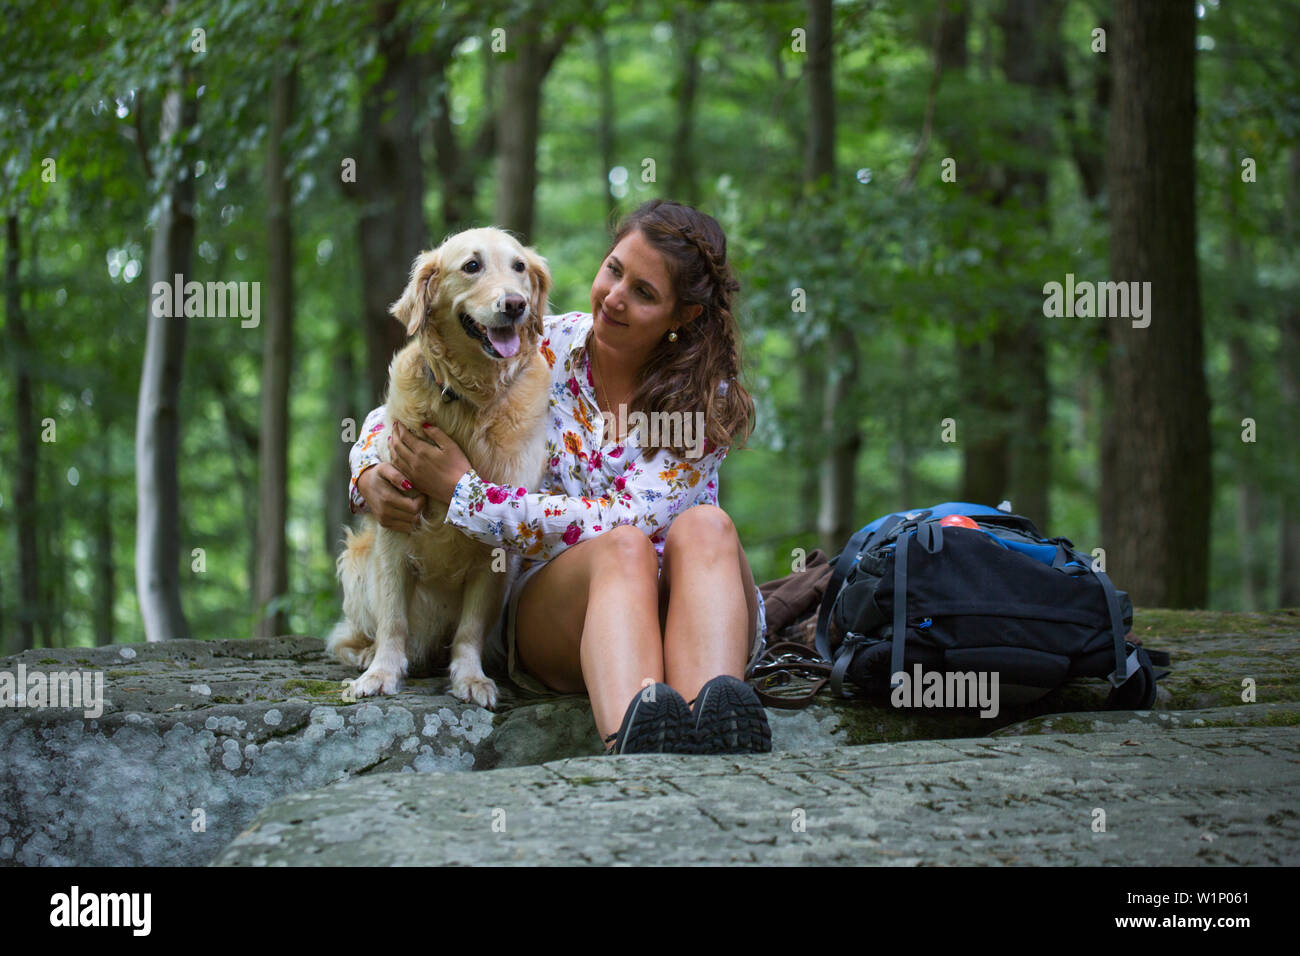 Young woman and Golden Retriever dog sit atop Lange Steine rock formation in Hessisches Kegelspiel mountains Stock Photo